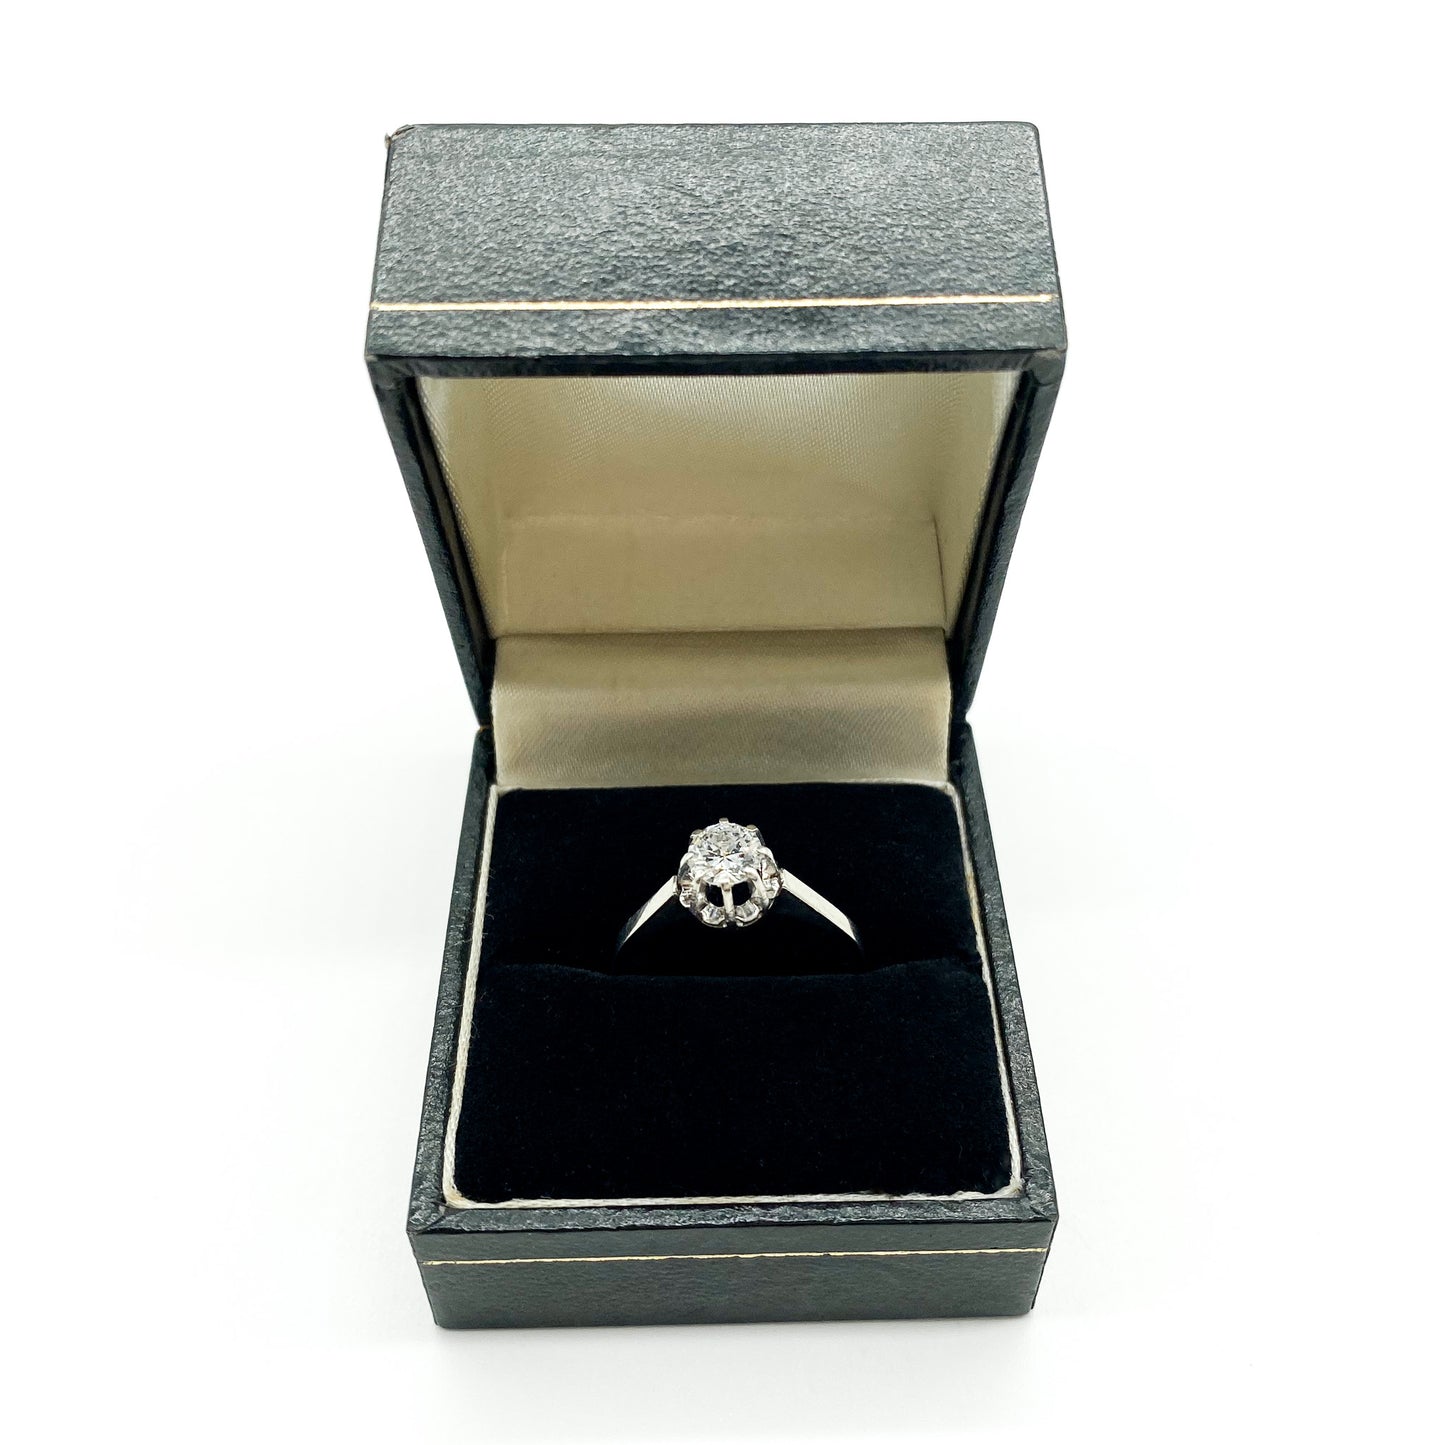 Classic 18ct white gold solitaire ring set with a lovely 0.50ct near colourless diamond.   Circa 1950’s